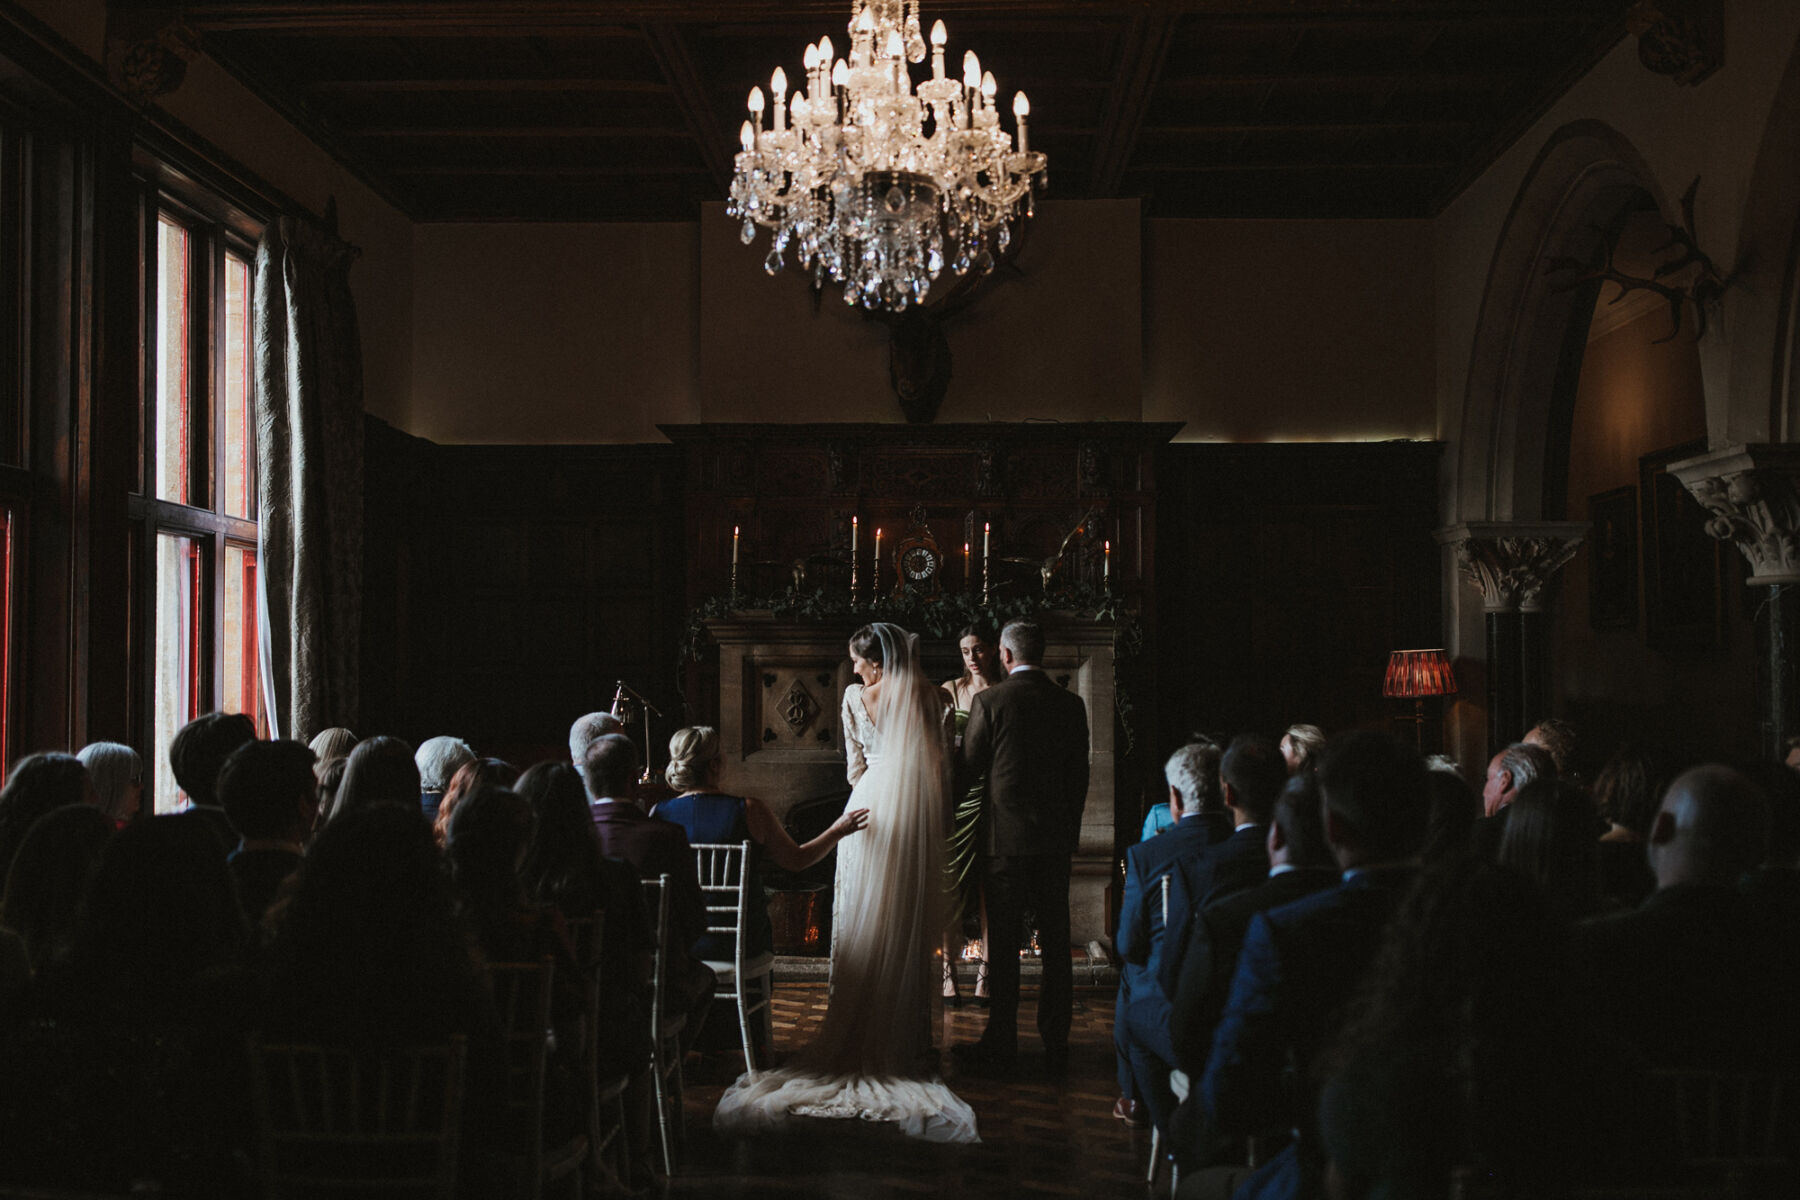 Bride and groom with their backs to the camera during their wedding cermeony at Huntsham Court, Devon. Bride wears a long cathedral length veil.